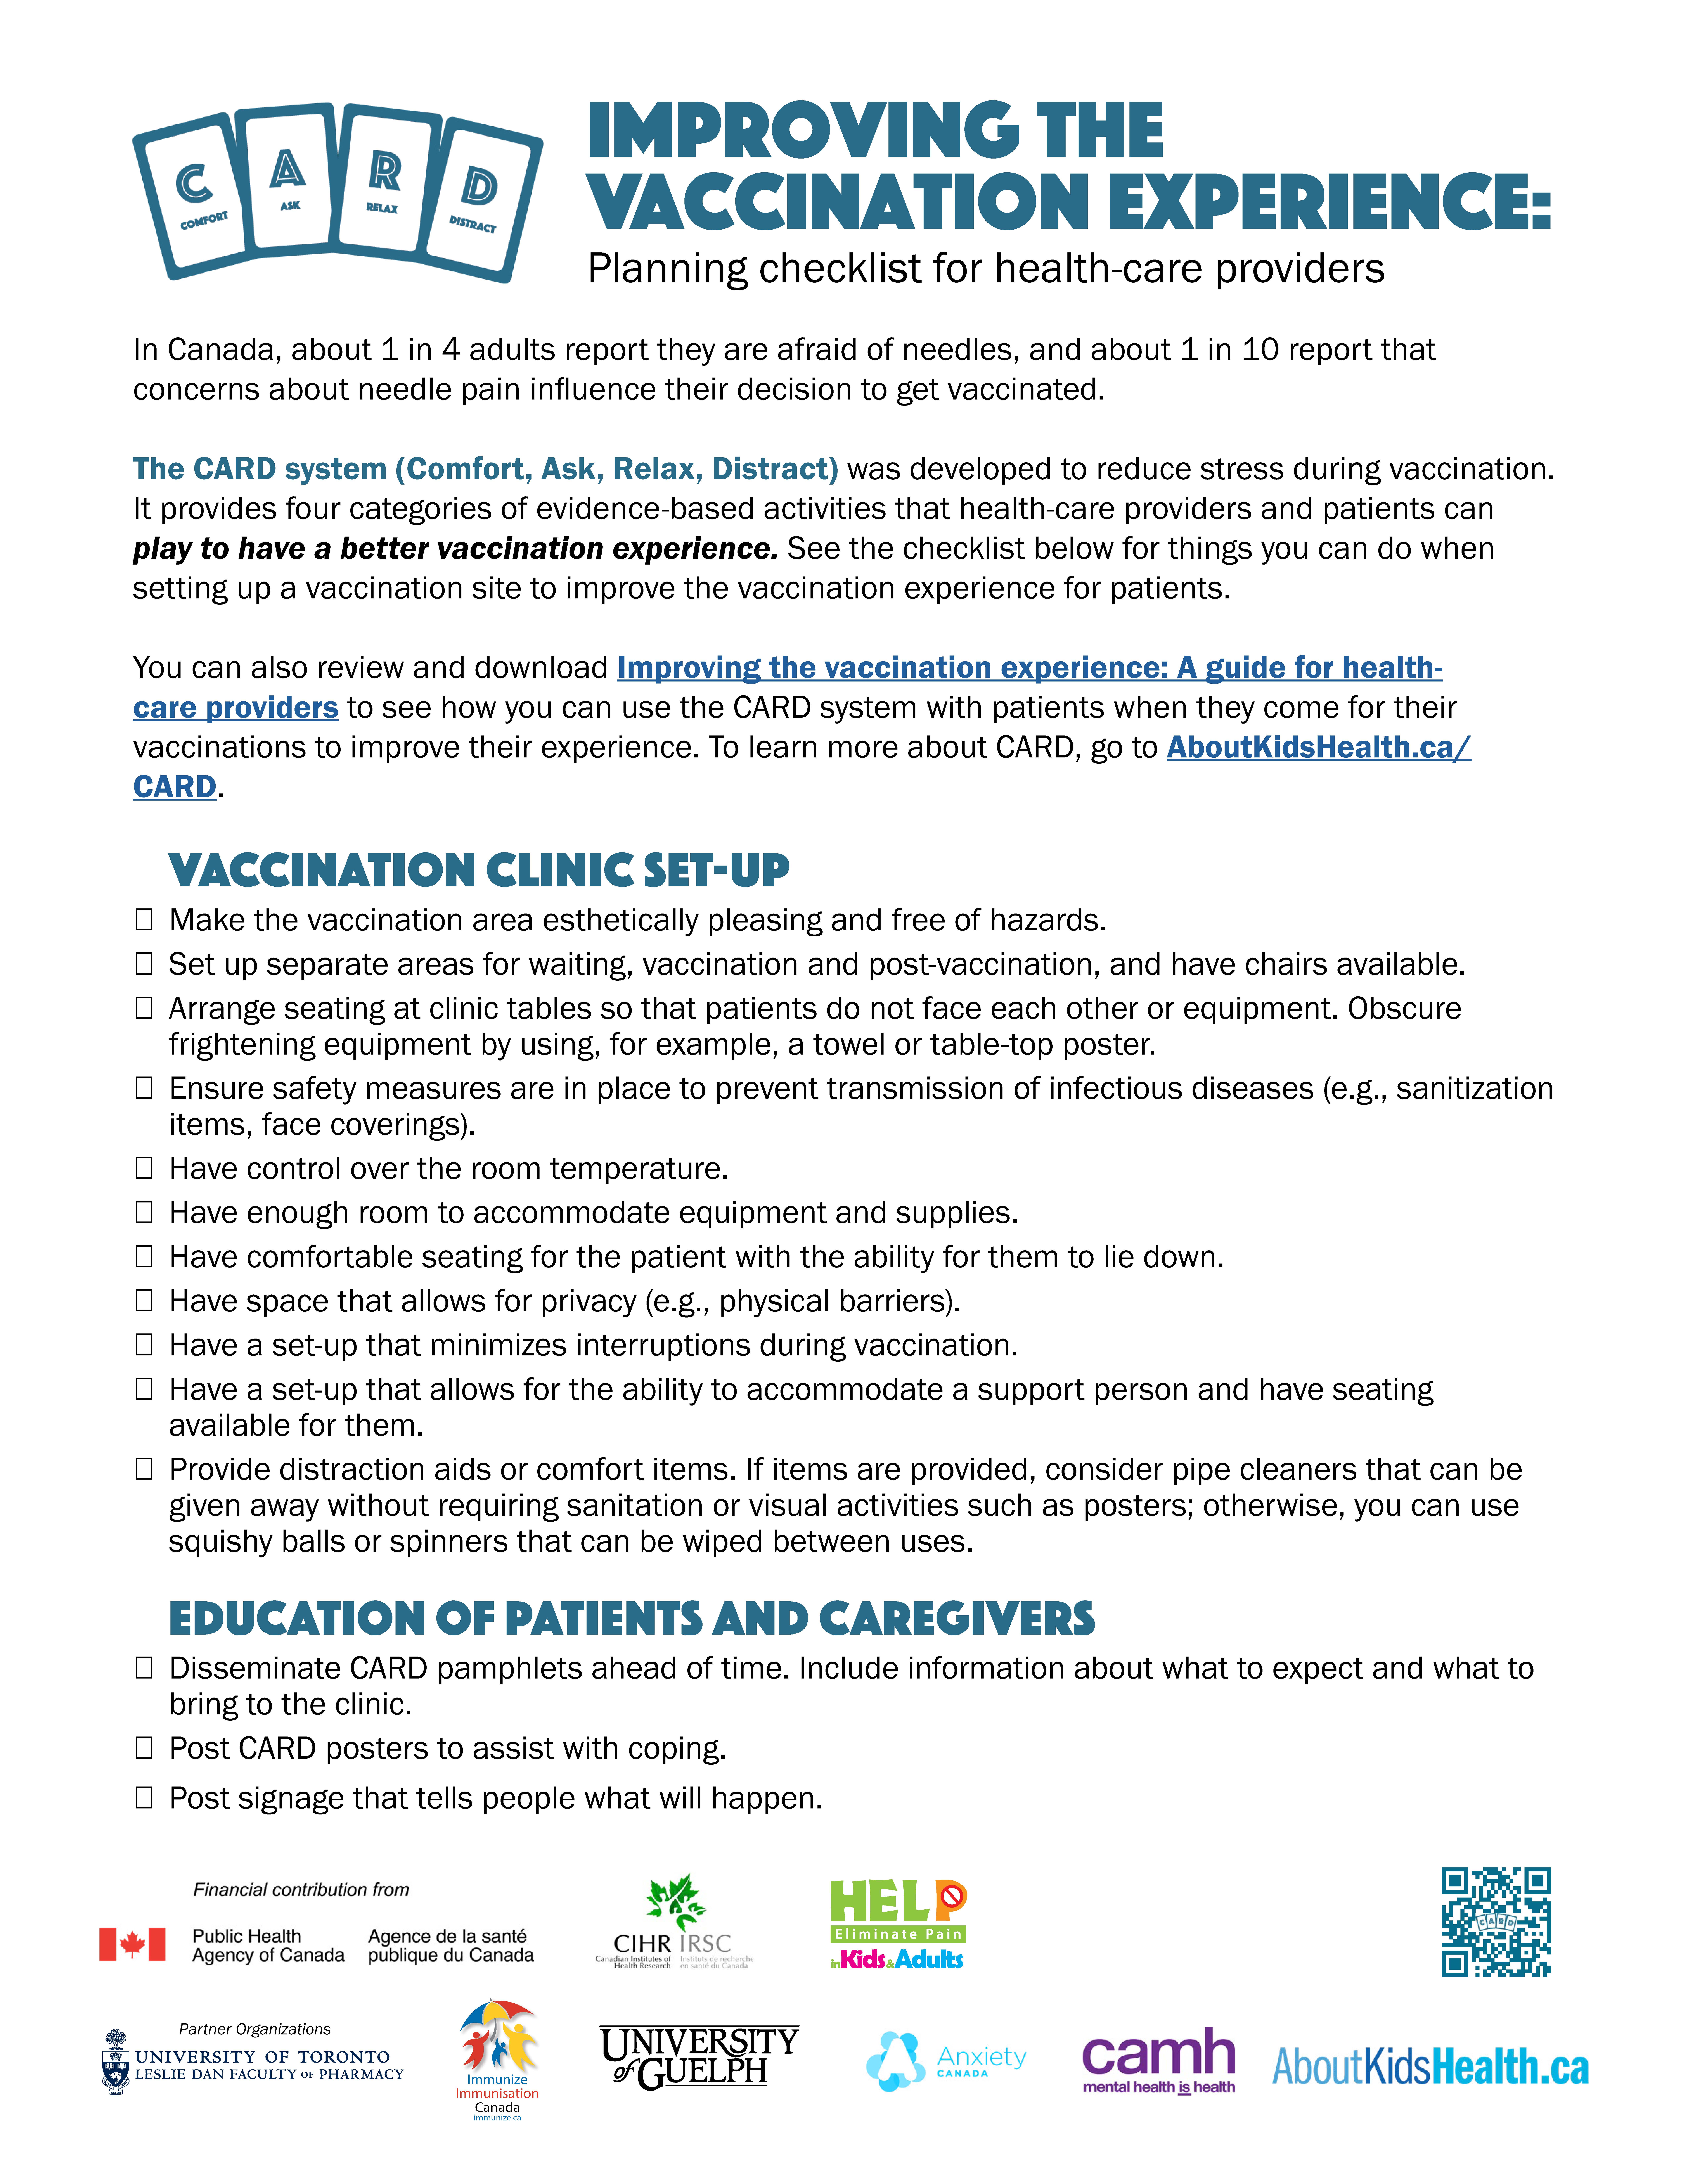 Planning checklist for health care providers: Improving the vaccination experience